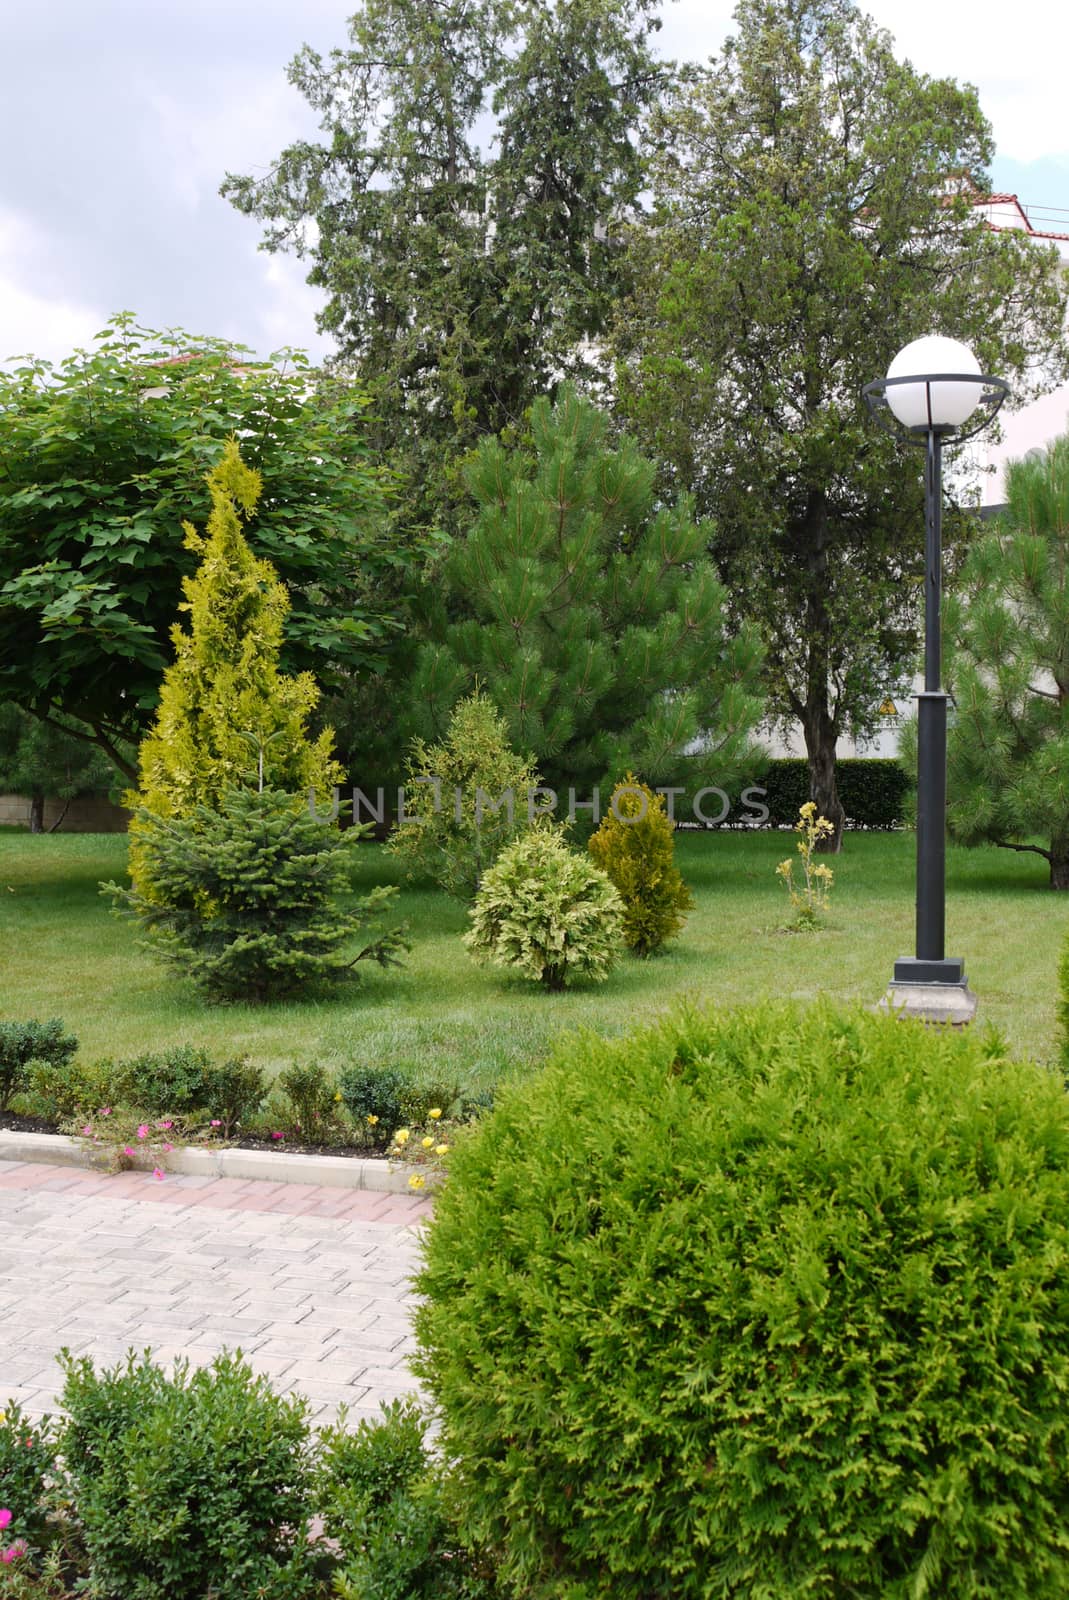 A spacious park alley lined with tiles, with decorative flower beds, lush green bushes and small spruce trees